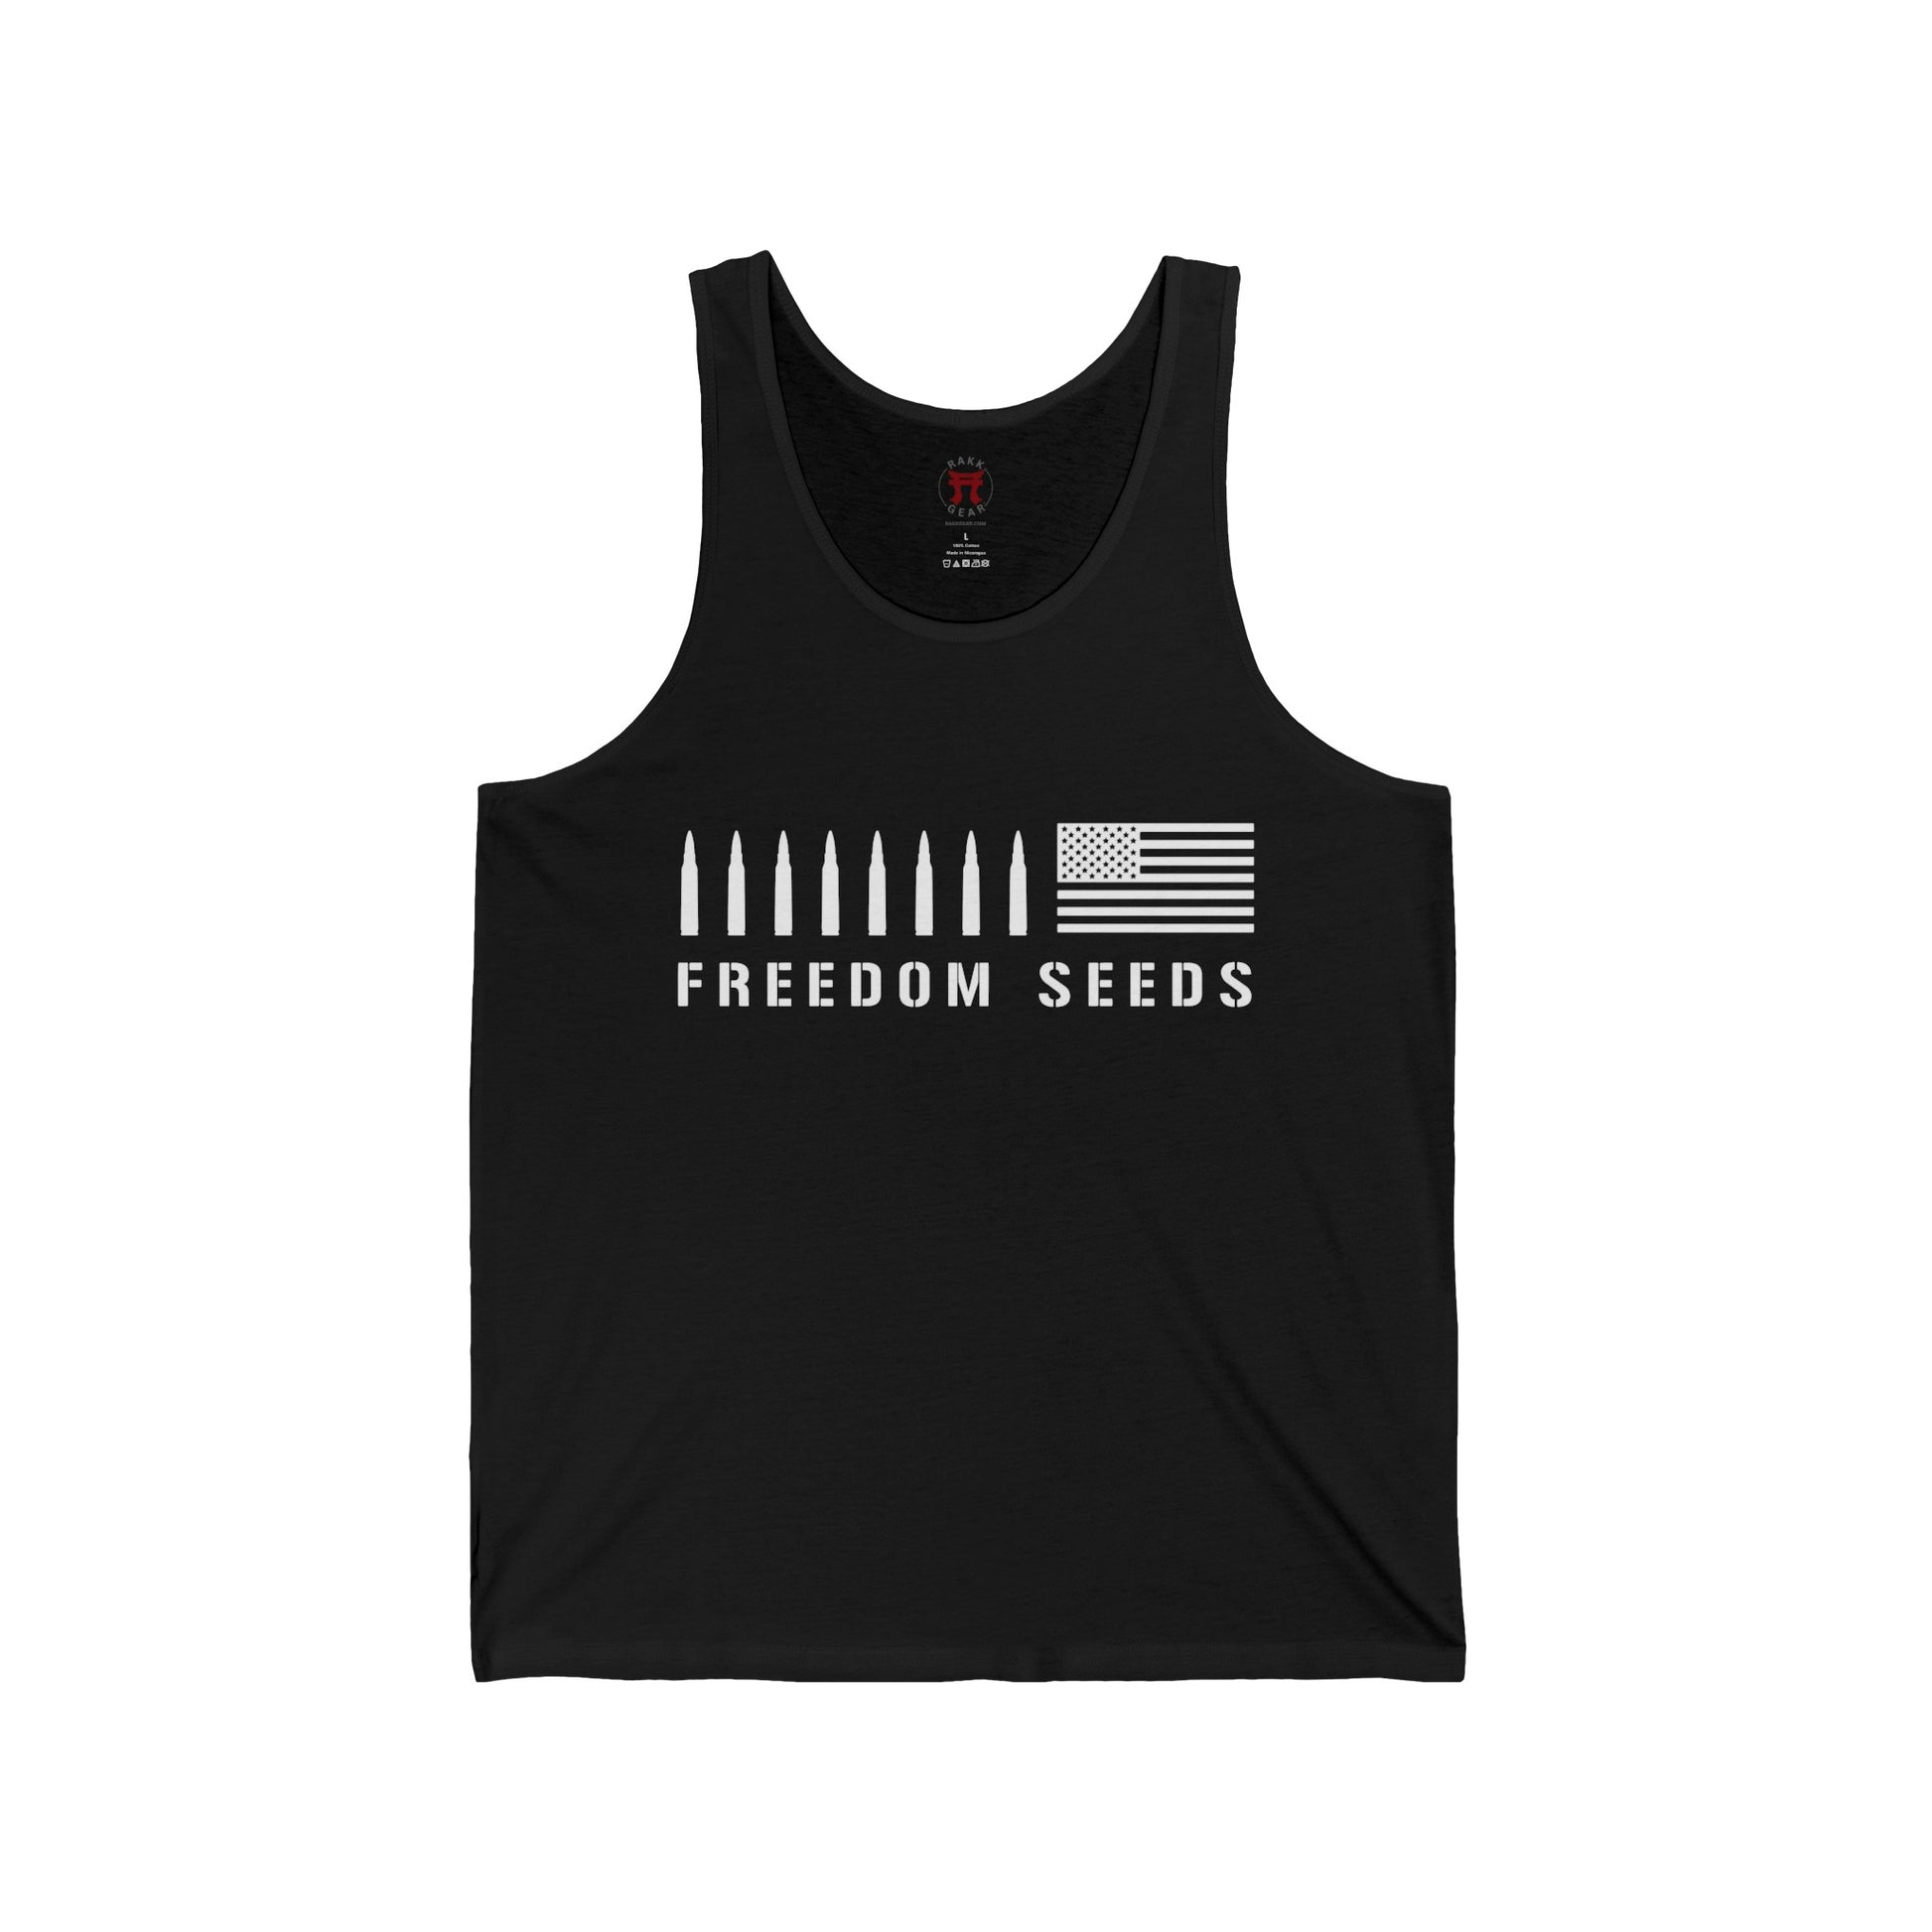 Rakkgear Freedom Seeds Tank Top in black with white lettering